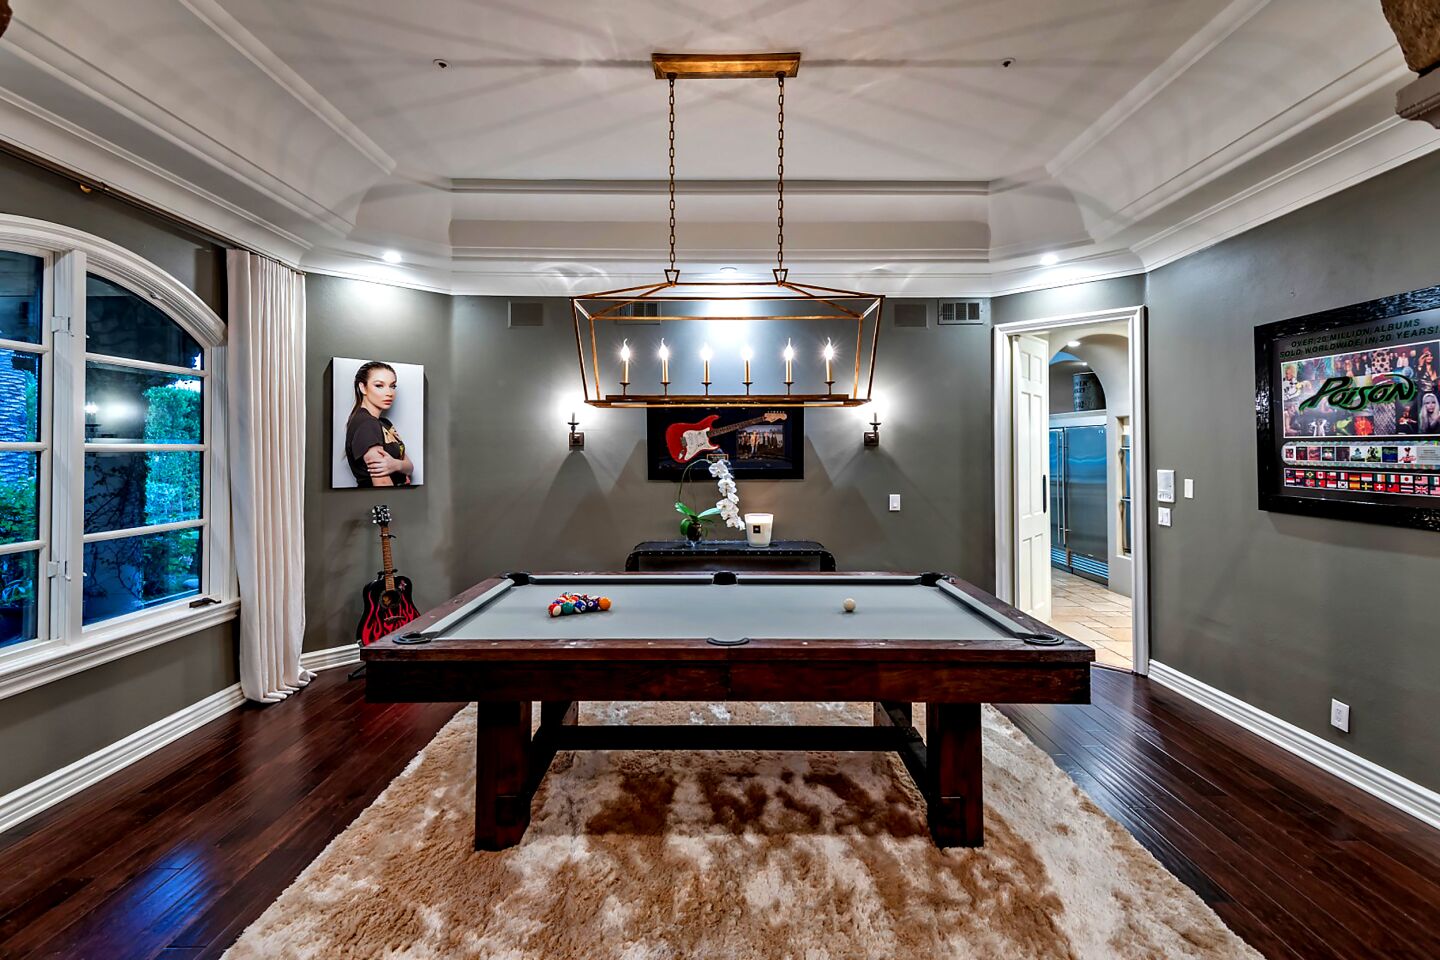 The amenity-loaded home includes a billiards room.